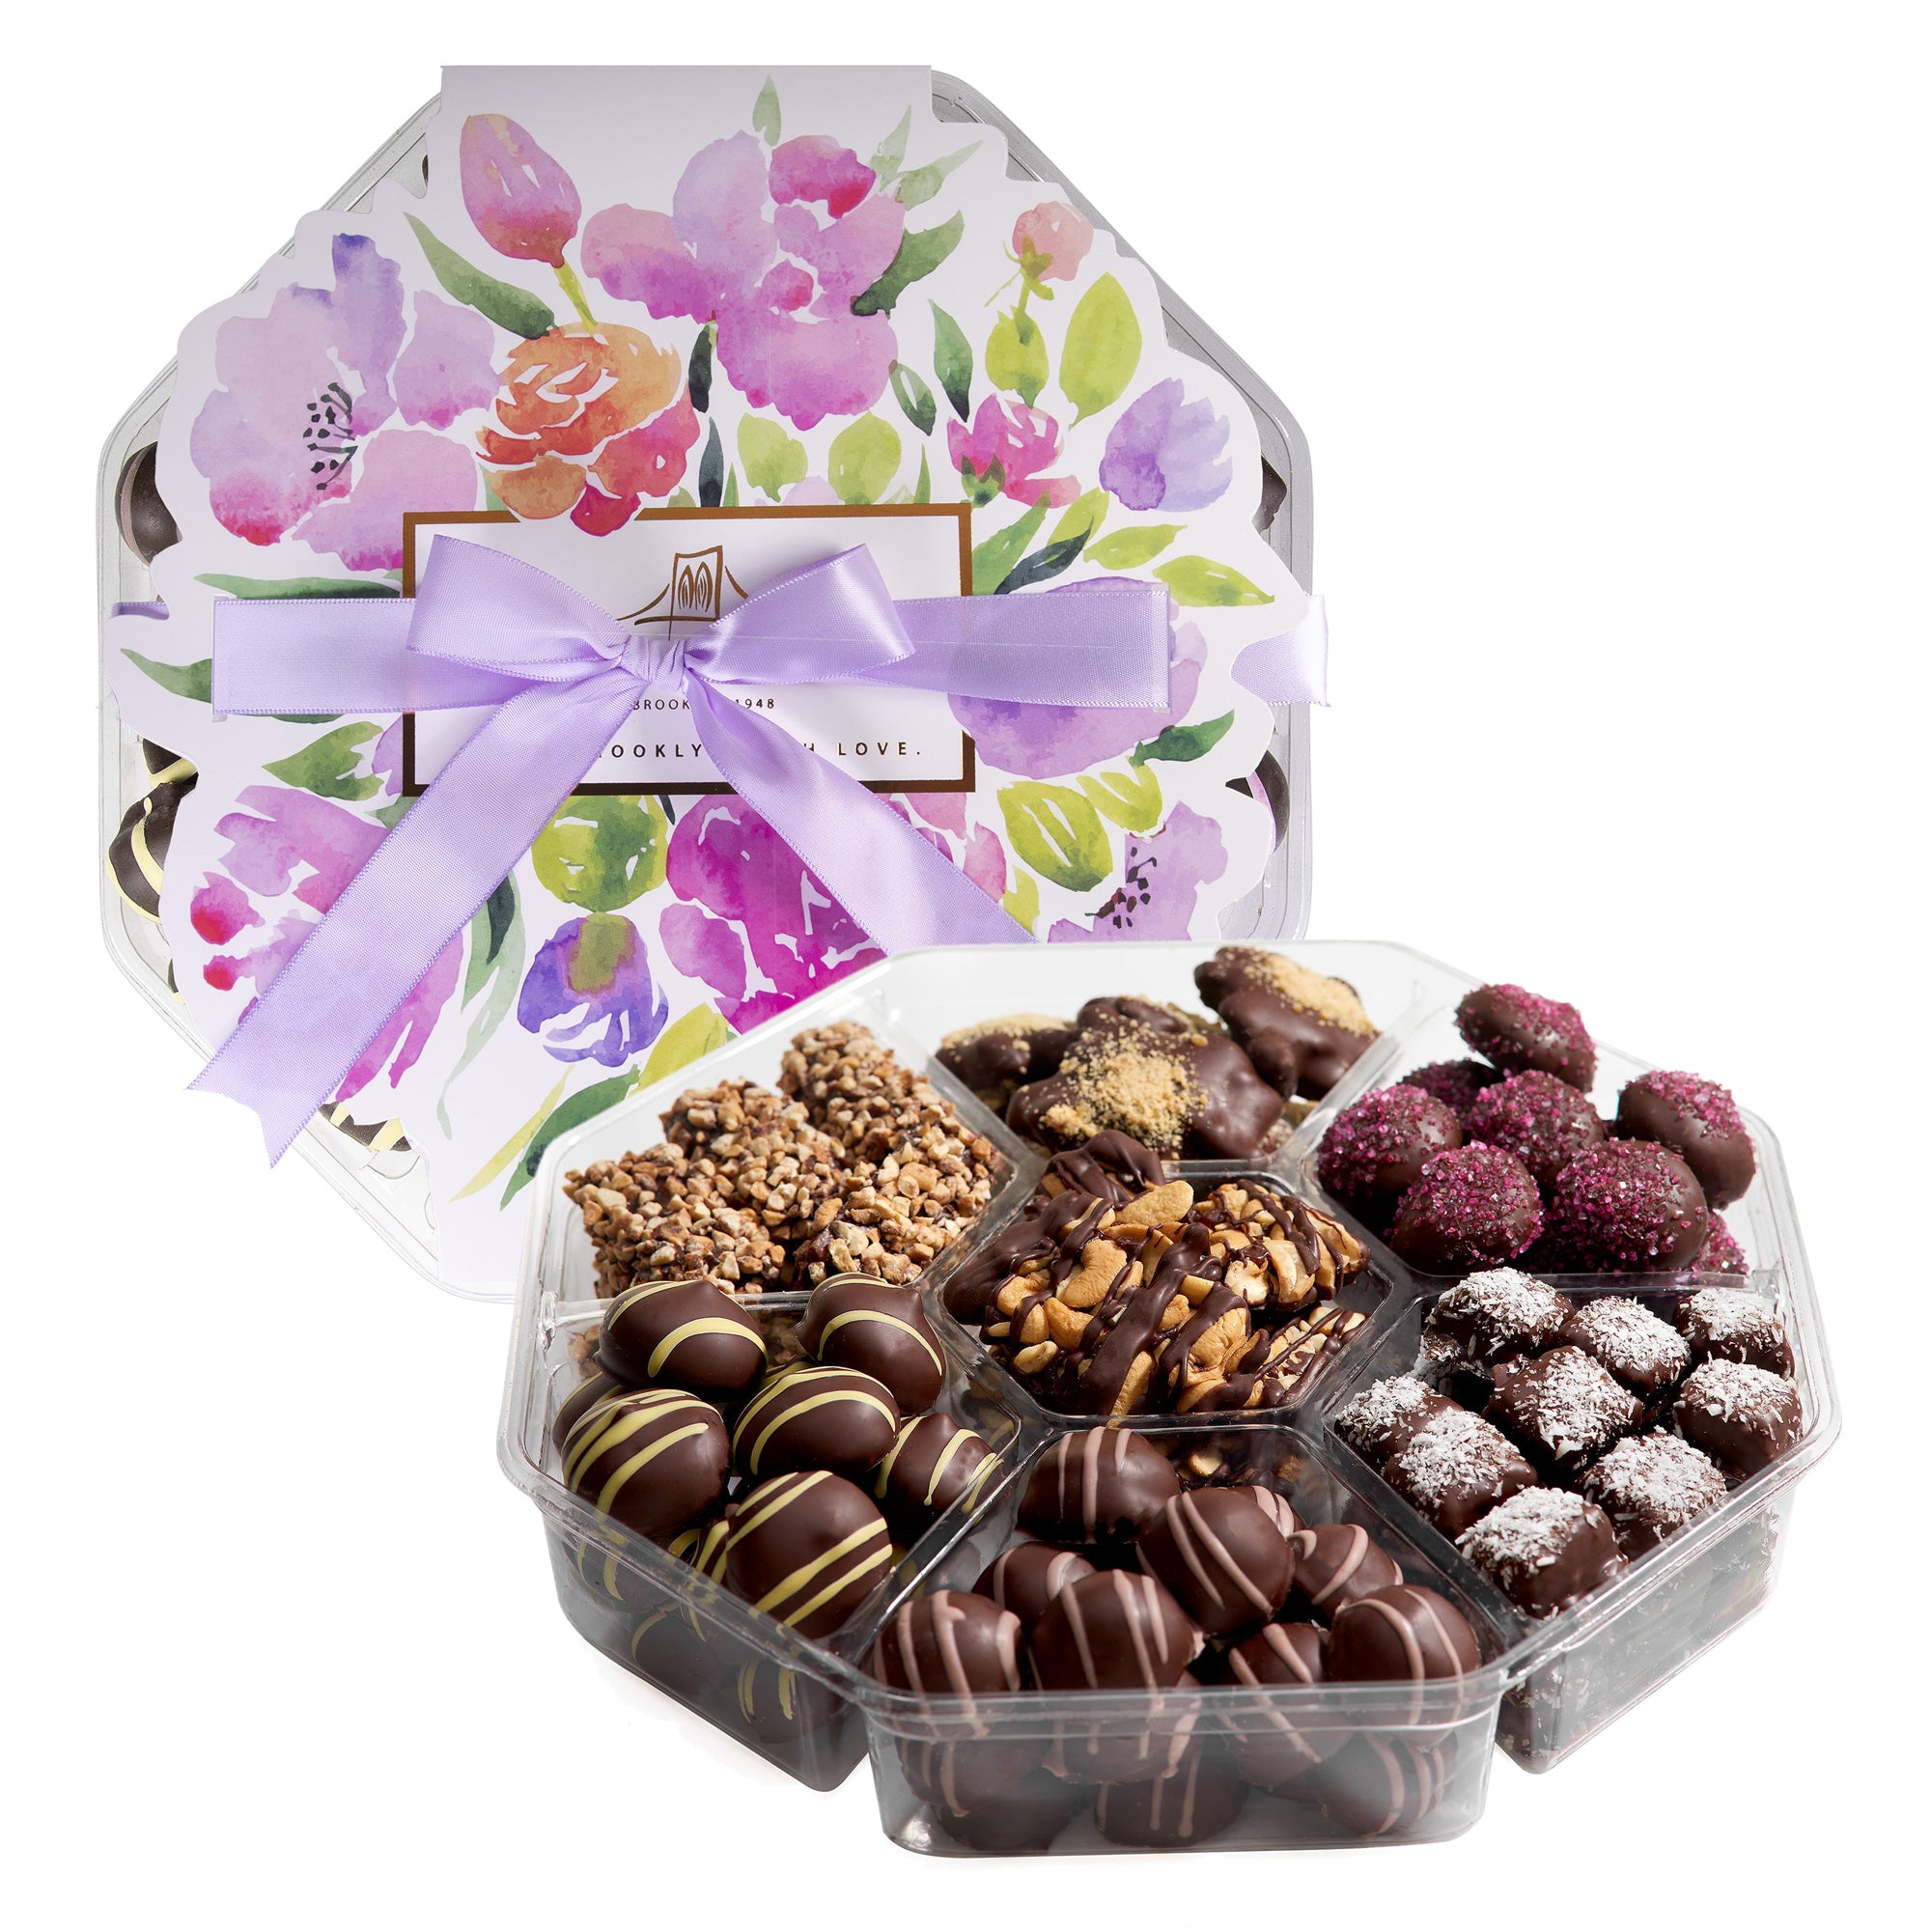 LOVE is Chocolate Gift Basket  Chocolate Gifts by Piece, Love &  Chocolate